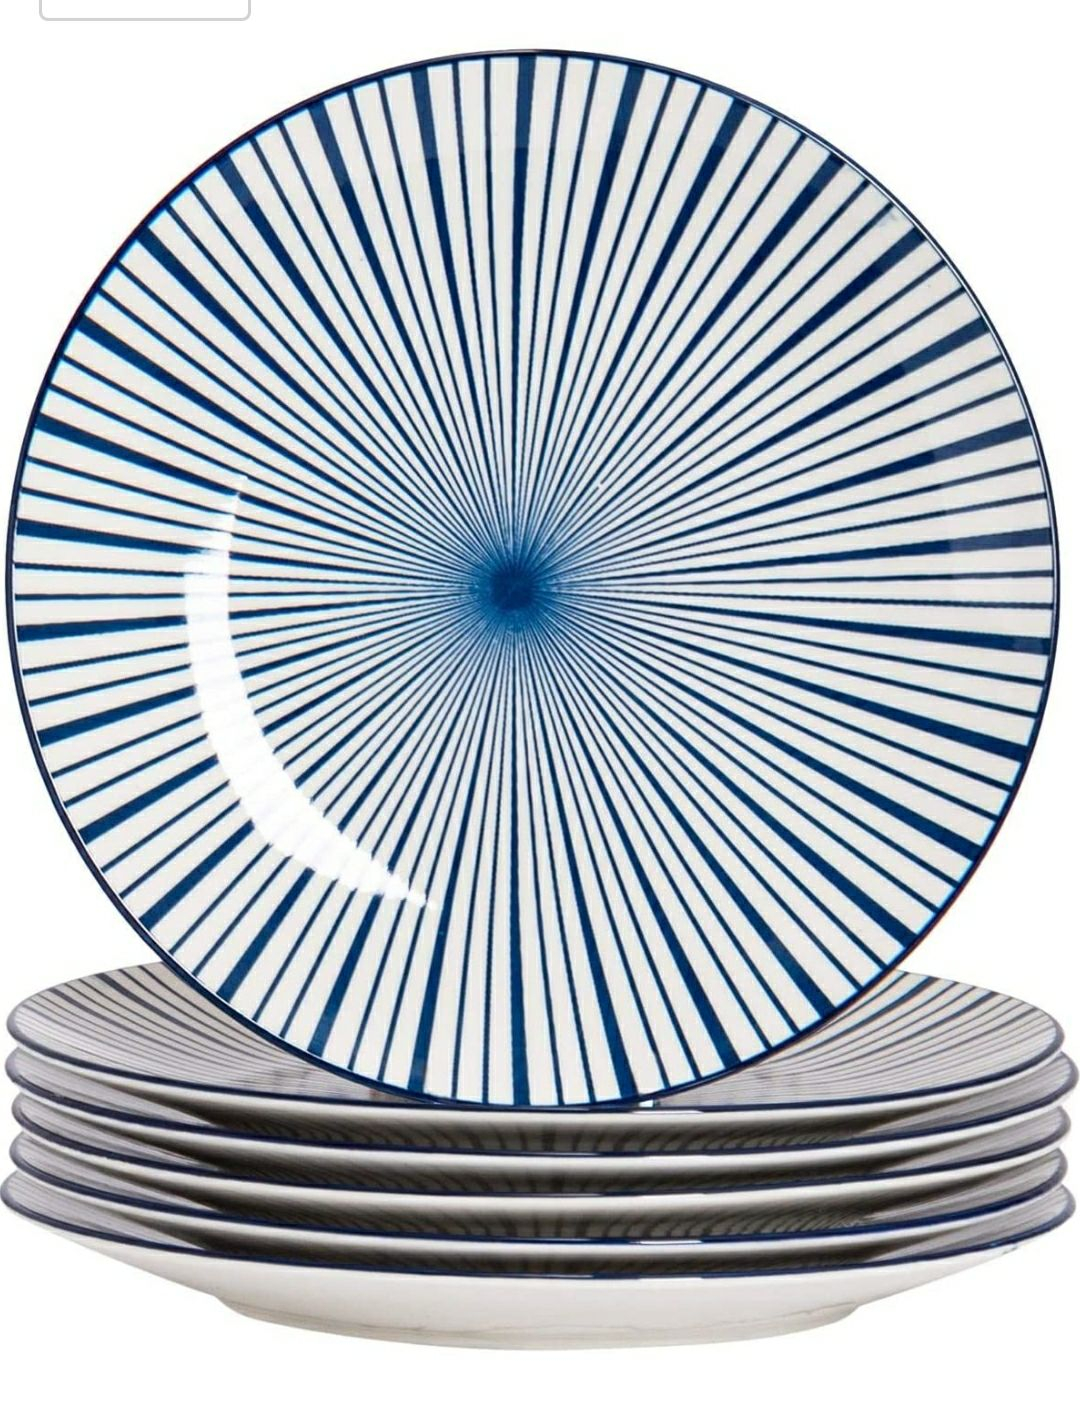 111° - 6 Piece Stripe Patterned Dinner Plate Set £8.99 also bowl set (see comments) - Dispatched from and sold by Rinkit Ltd.